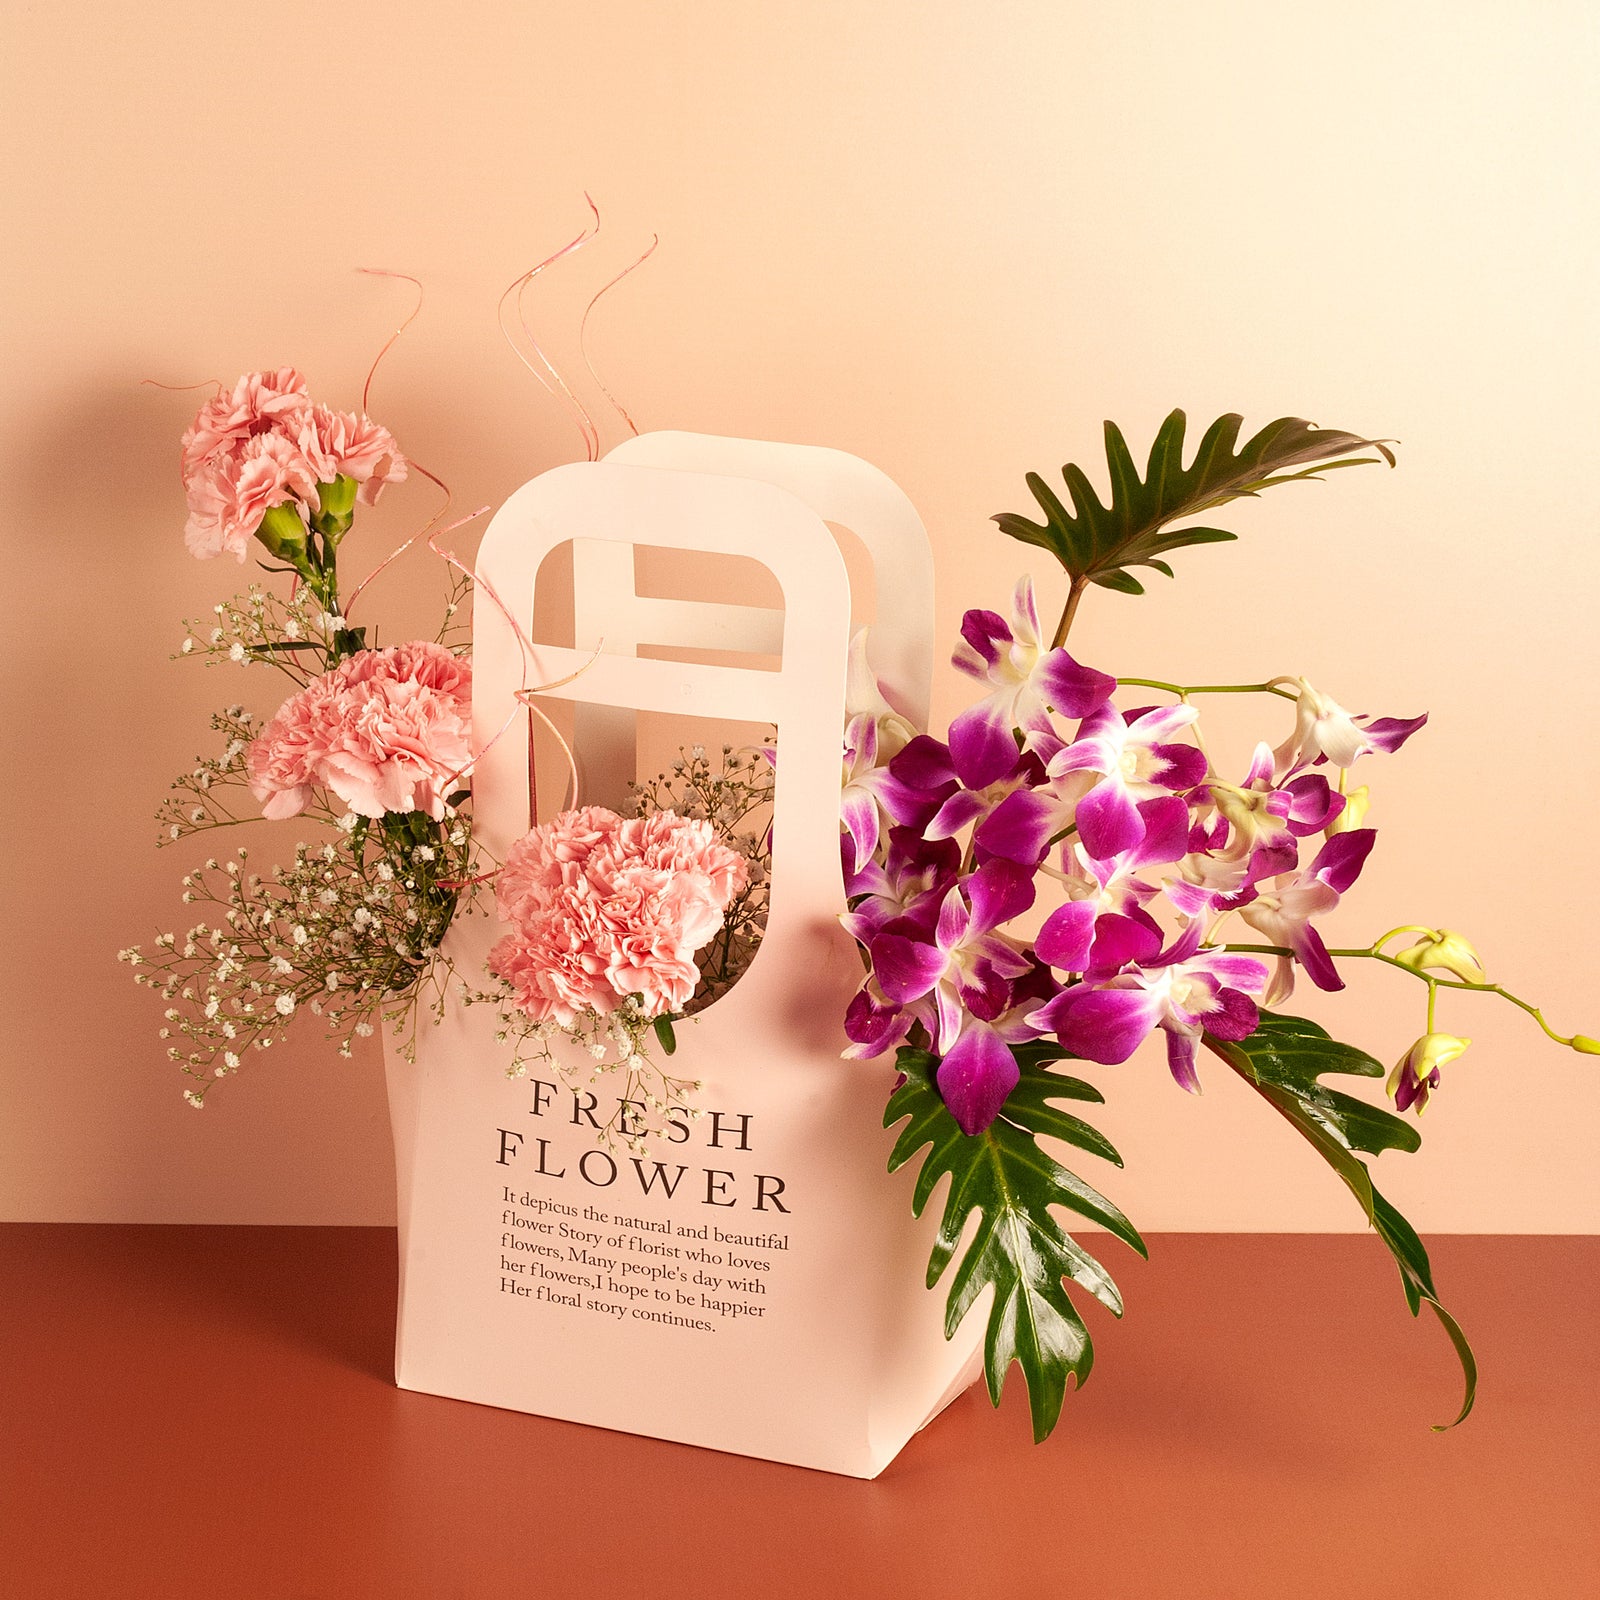 flower bouquet online - light pink carnations and purple orchids arranged in paper bag